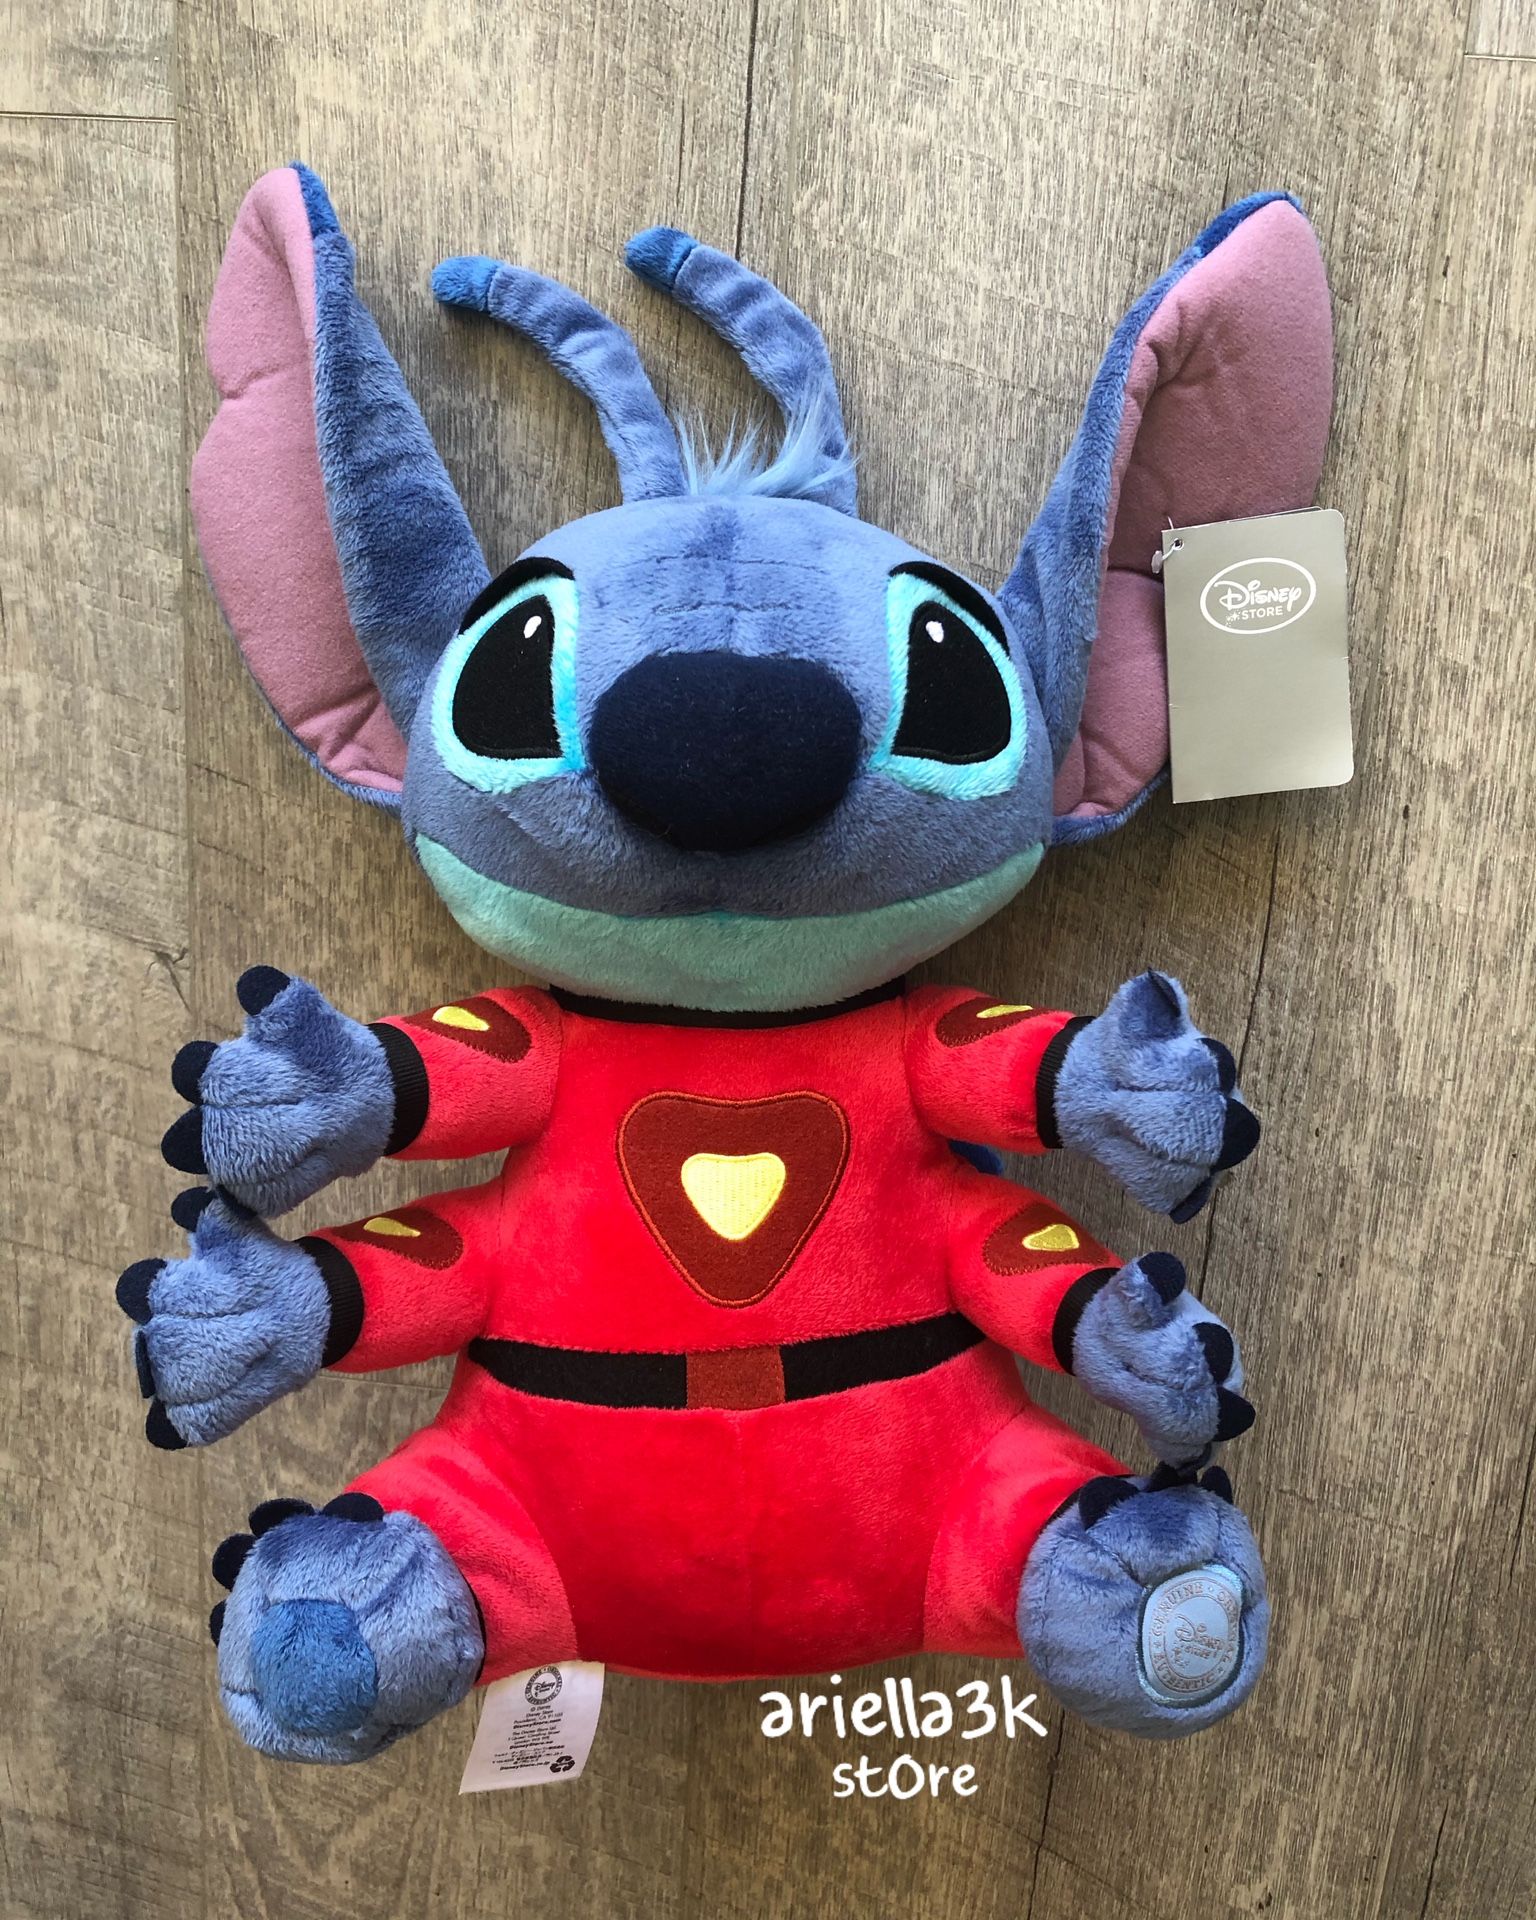 NEW! With tag!!! Disney Store Stitch Plush Alien 16" Red Space Suit Jumbo 6 Arms.